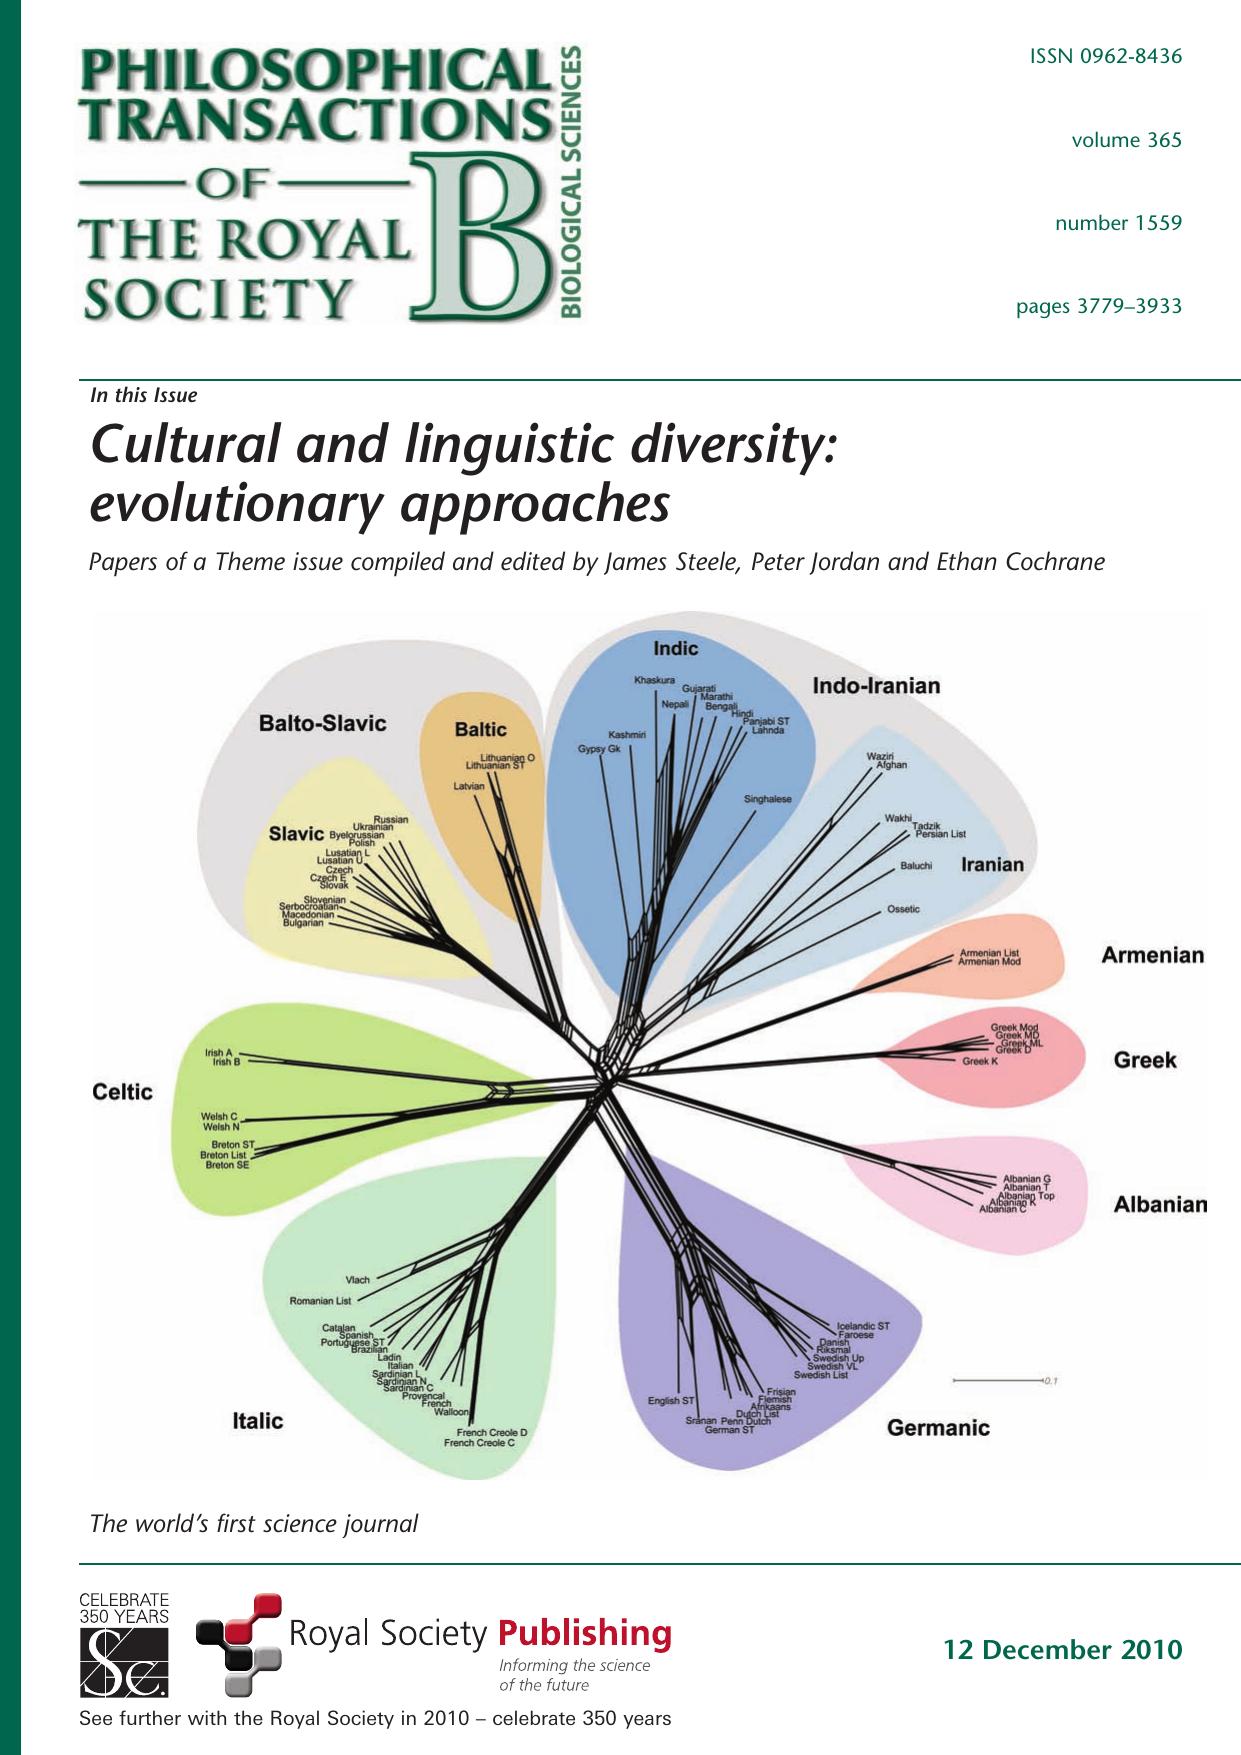 Cultural and Linguistic Diversity: Evolutionary Approaches